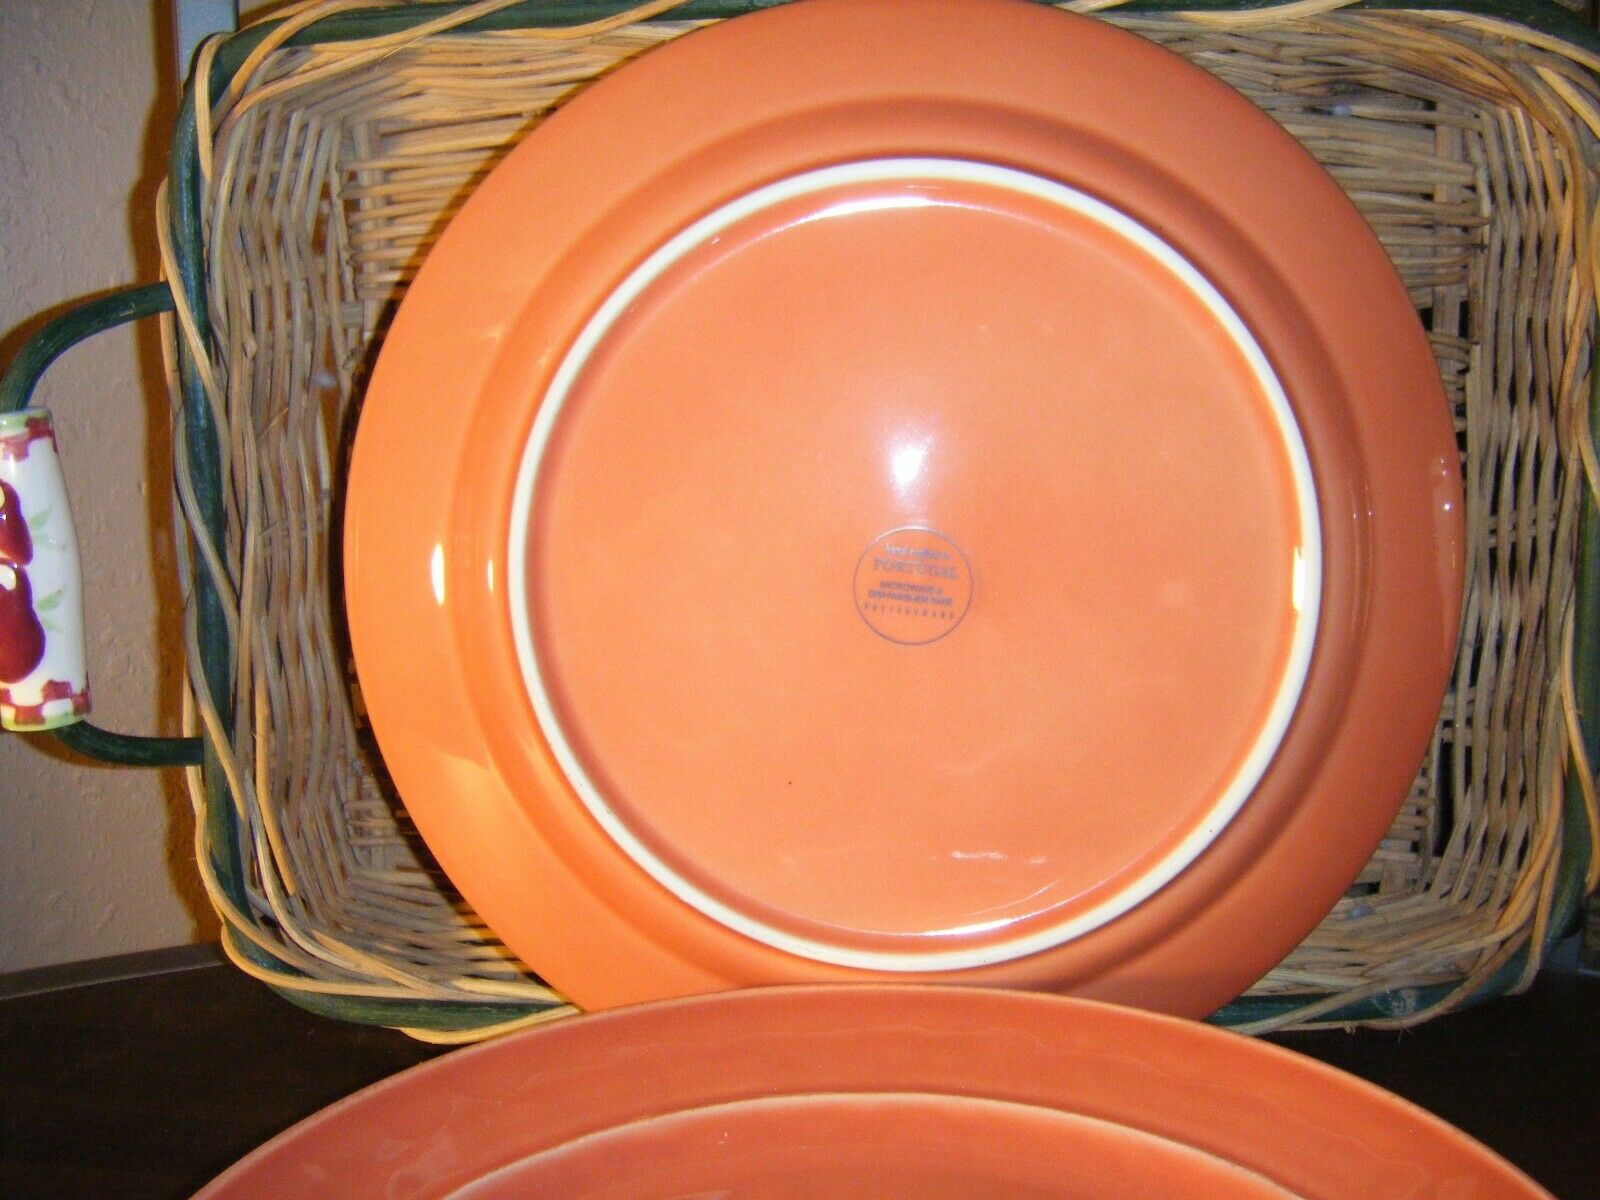 Potterybarn Cambria Portugal Persimmon ~ Lot Of 3 ~ Great Dinner Plates 11,3/4"